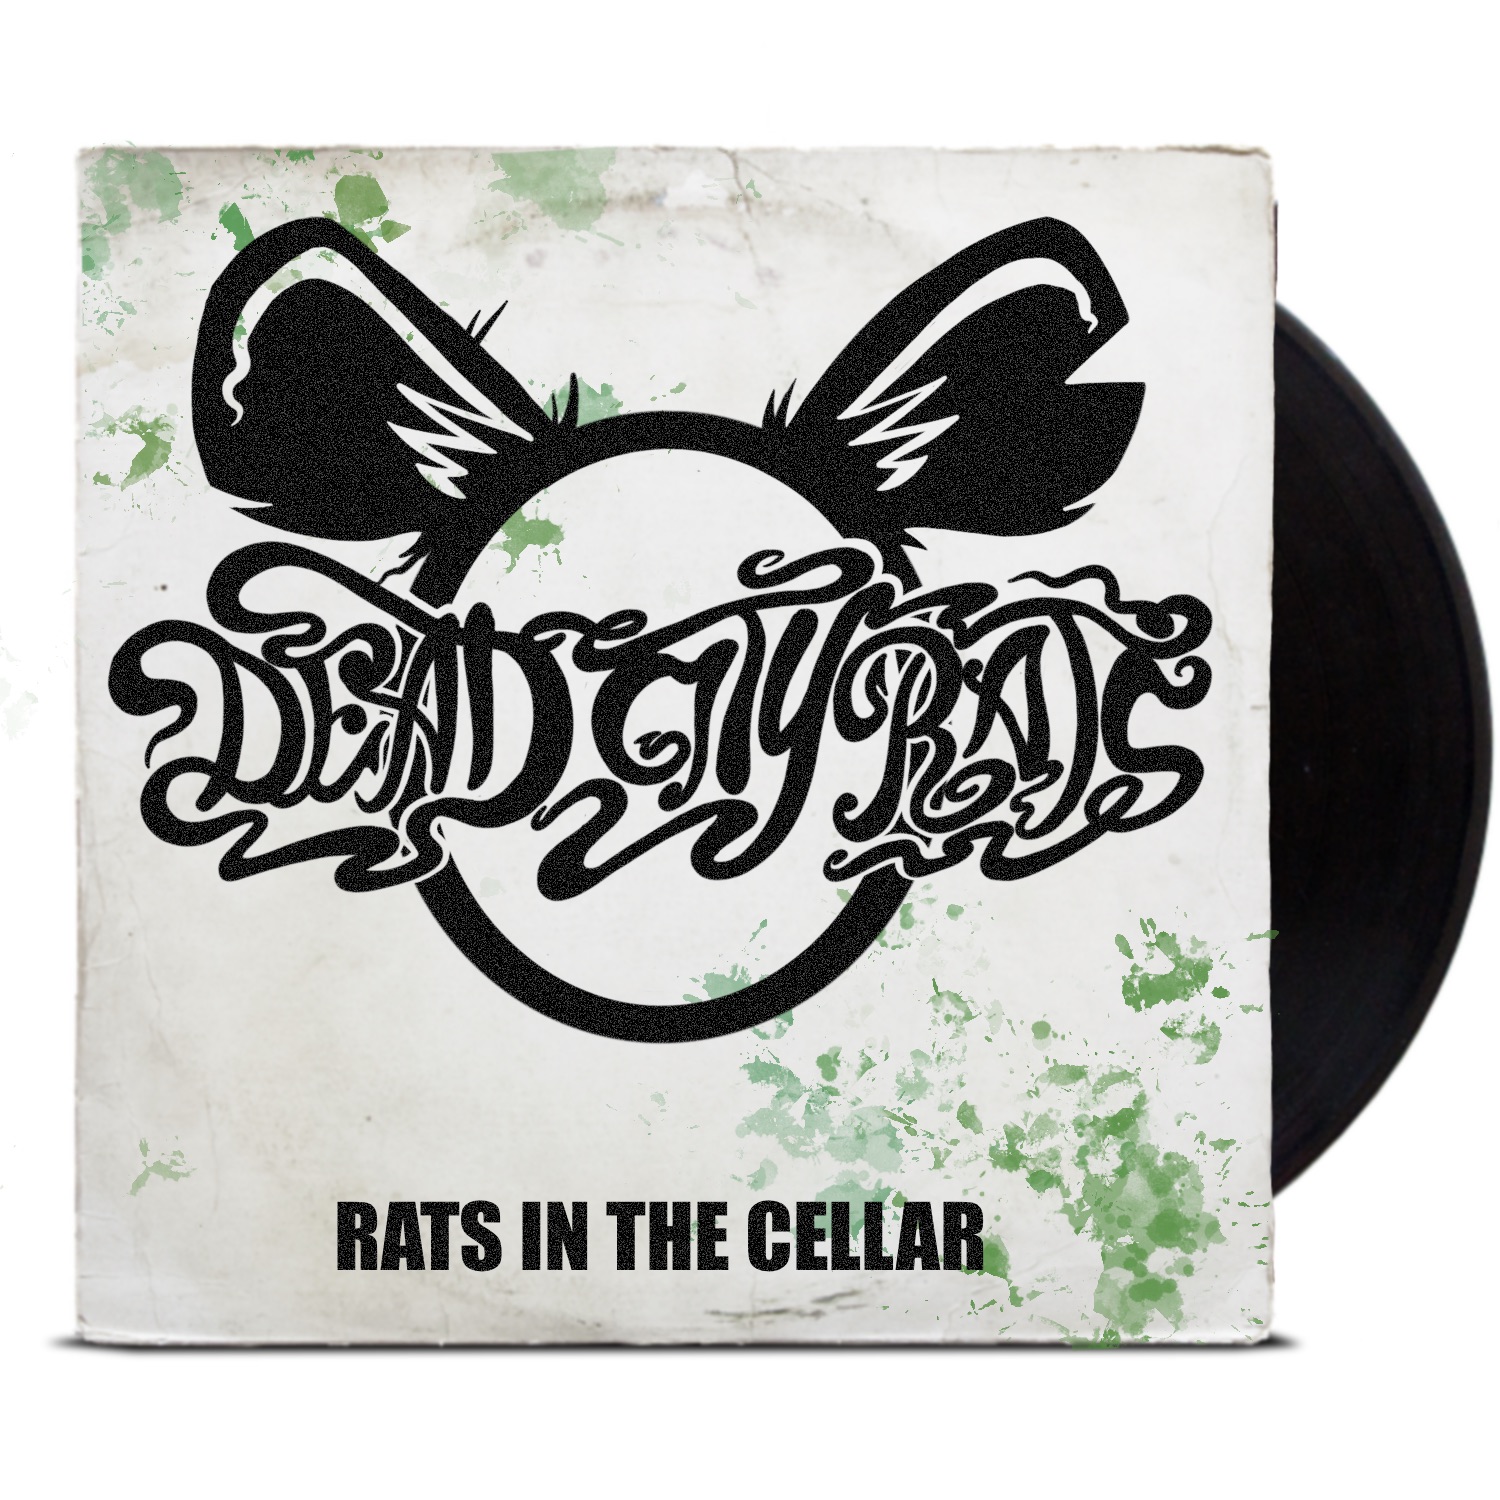 Record cover for Rats in the Cellar by dead City Rats